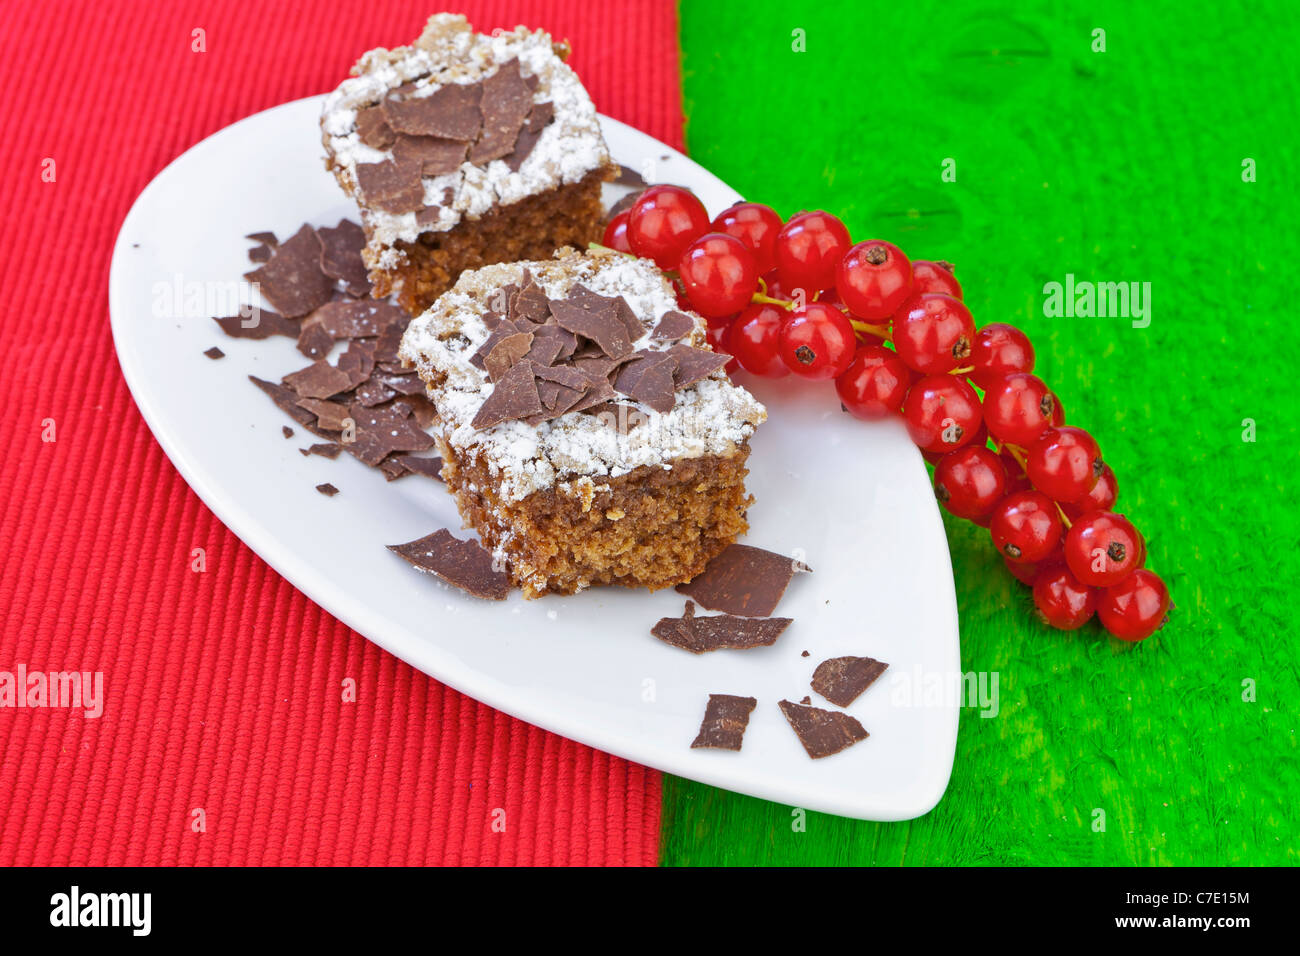 Chocolate cake with icing and chocolate shavings, served with red currants. Stock Photo